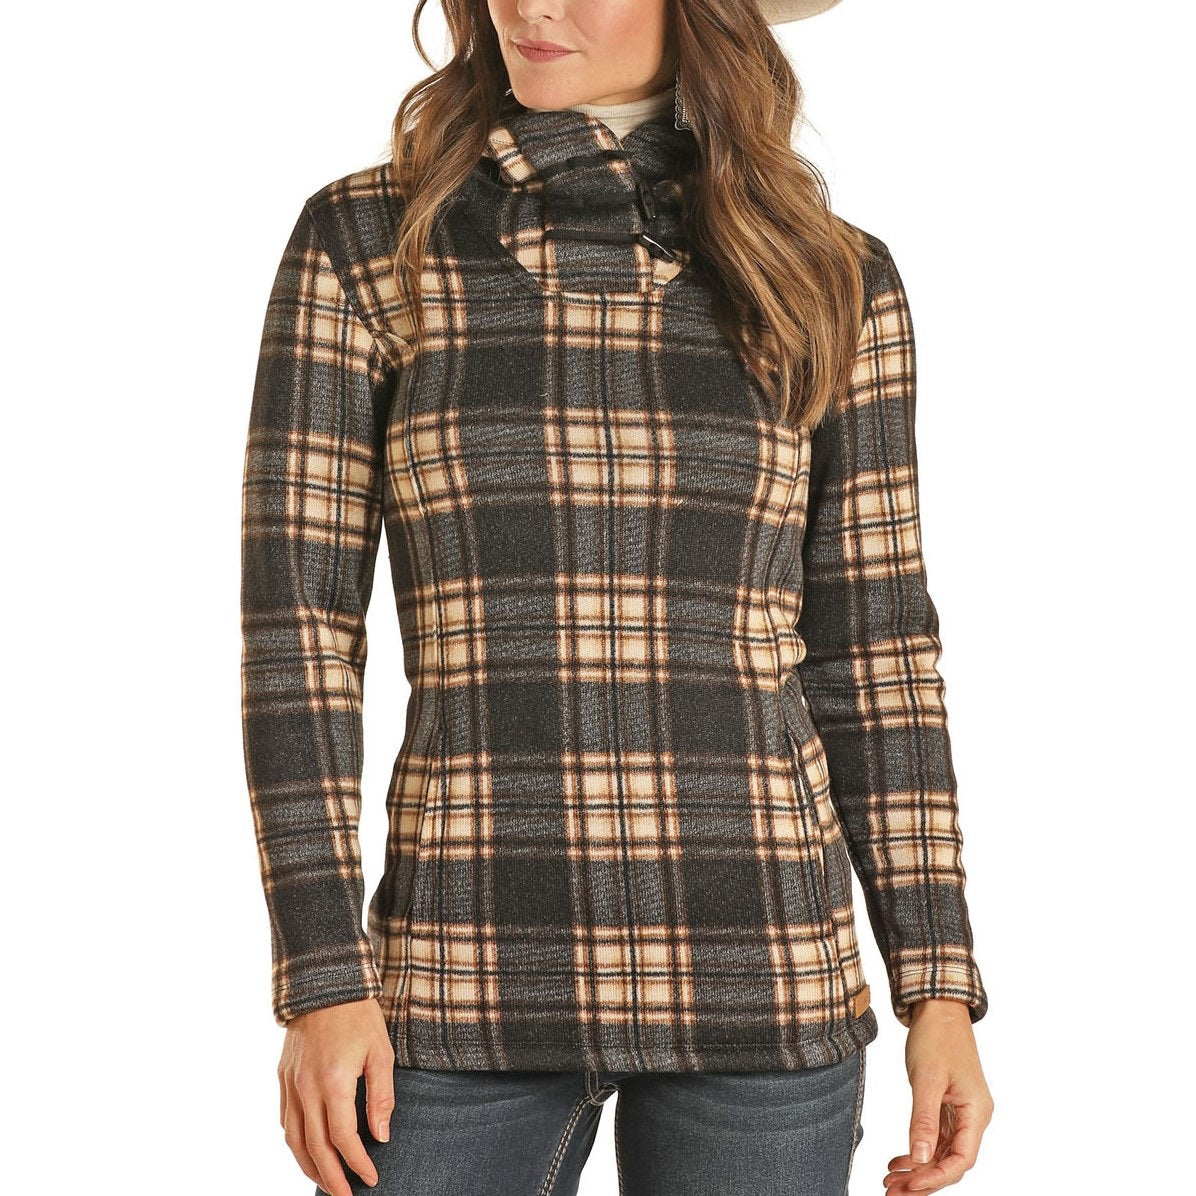 Powder River Outfitters Ladies Plaid Brown Fleece Pullover 51-1044-22